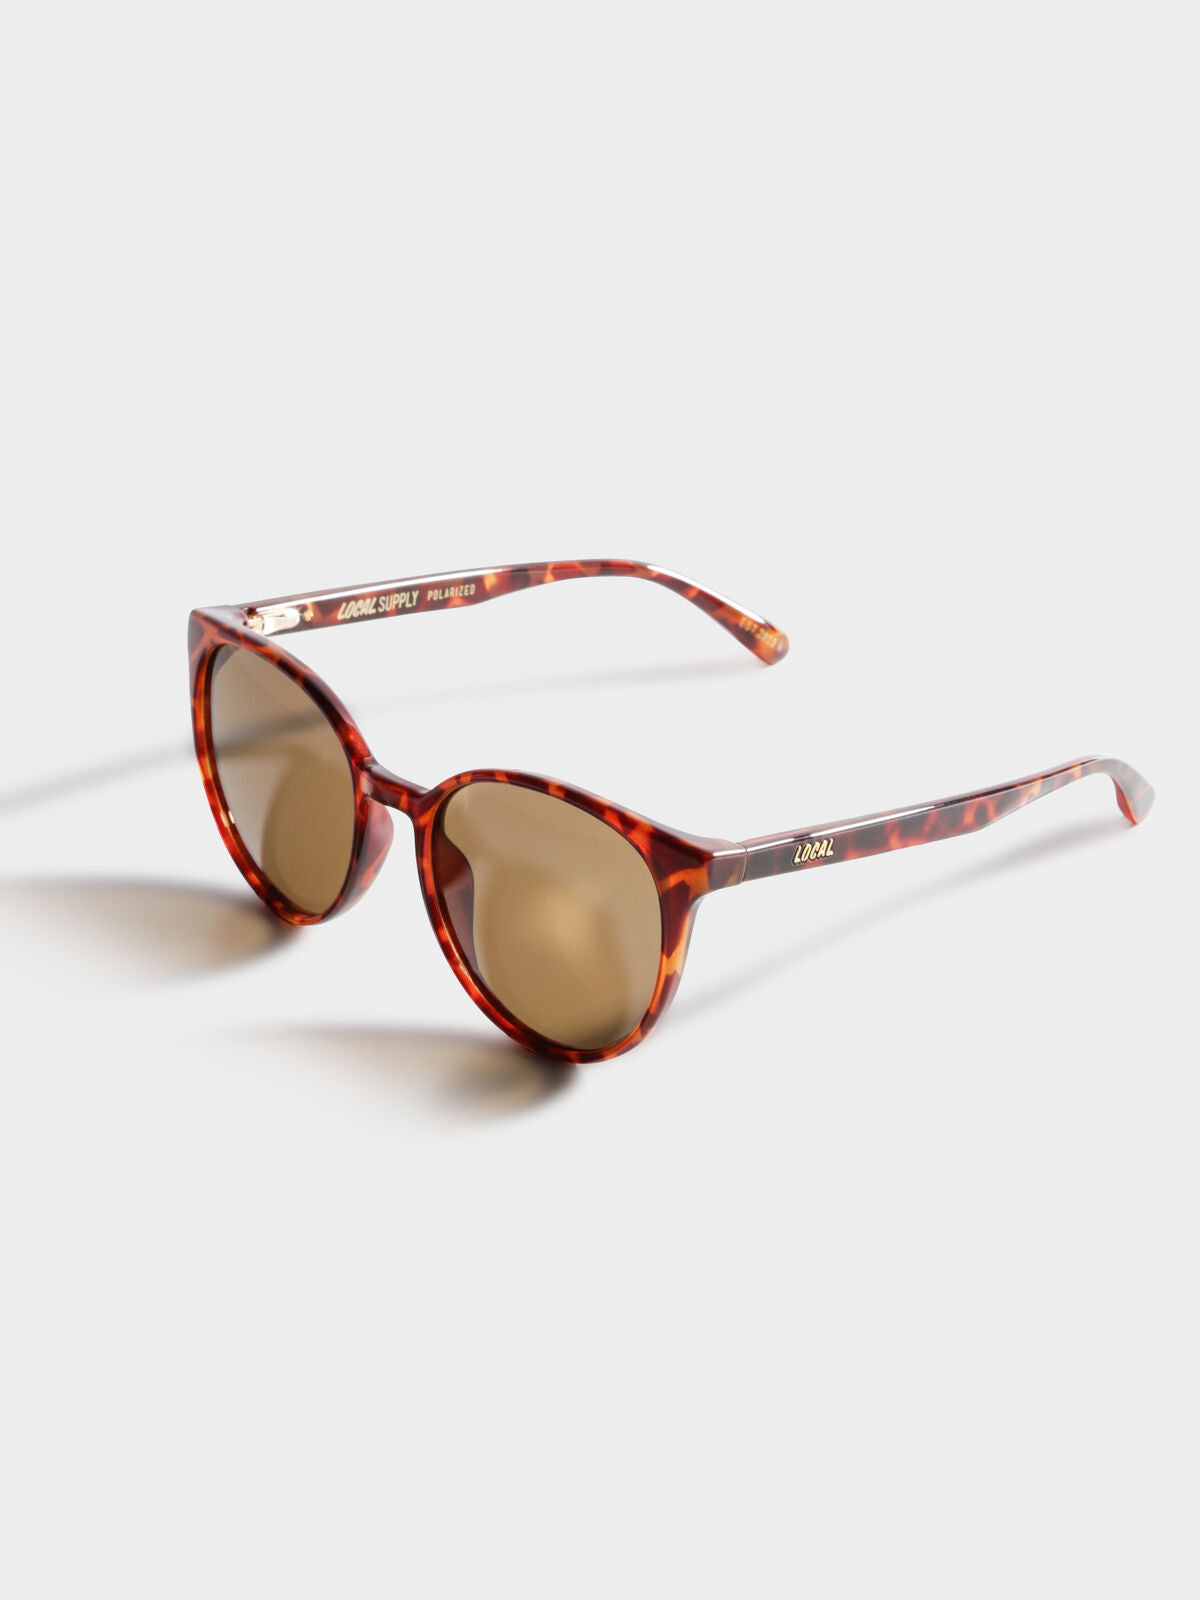 Gallery TLP3 Polarised Sunglasses in Polished Tortiseshell